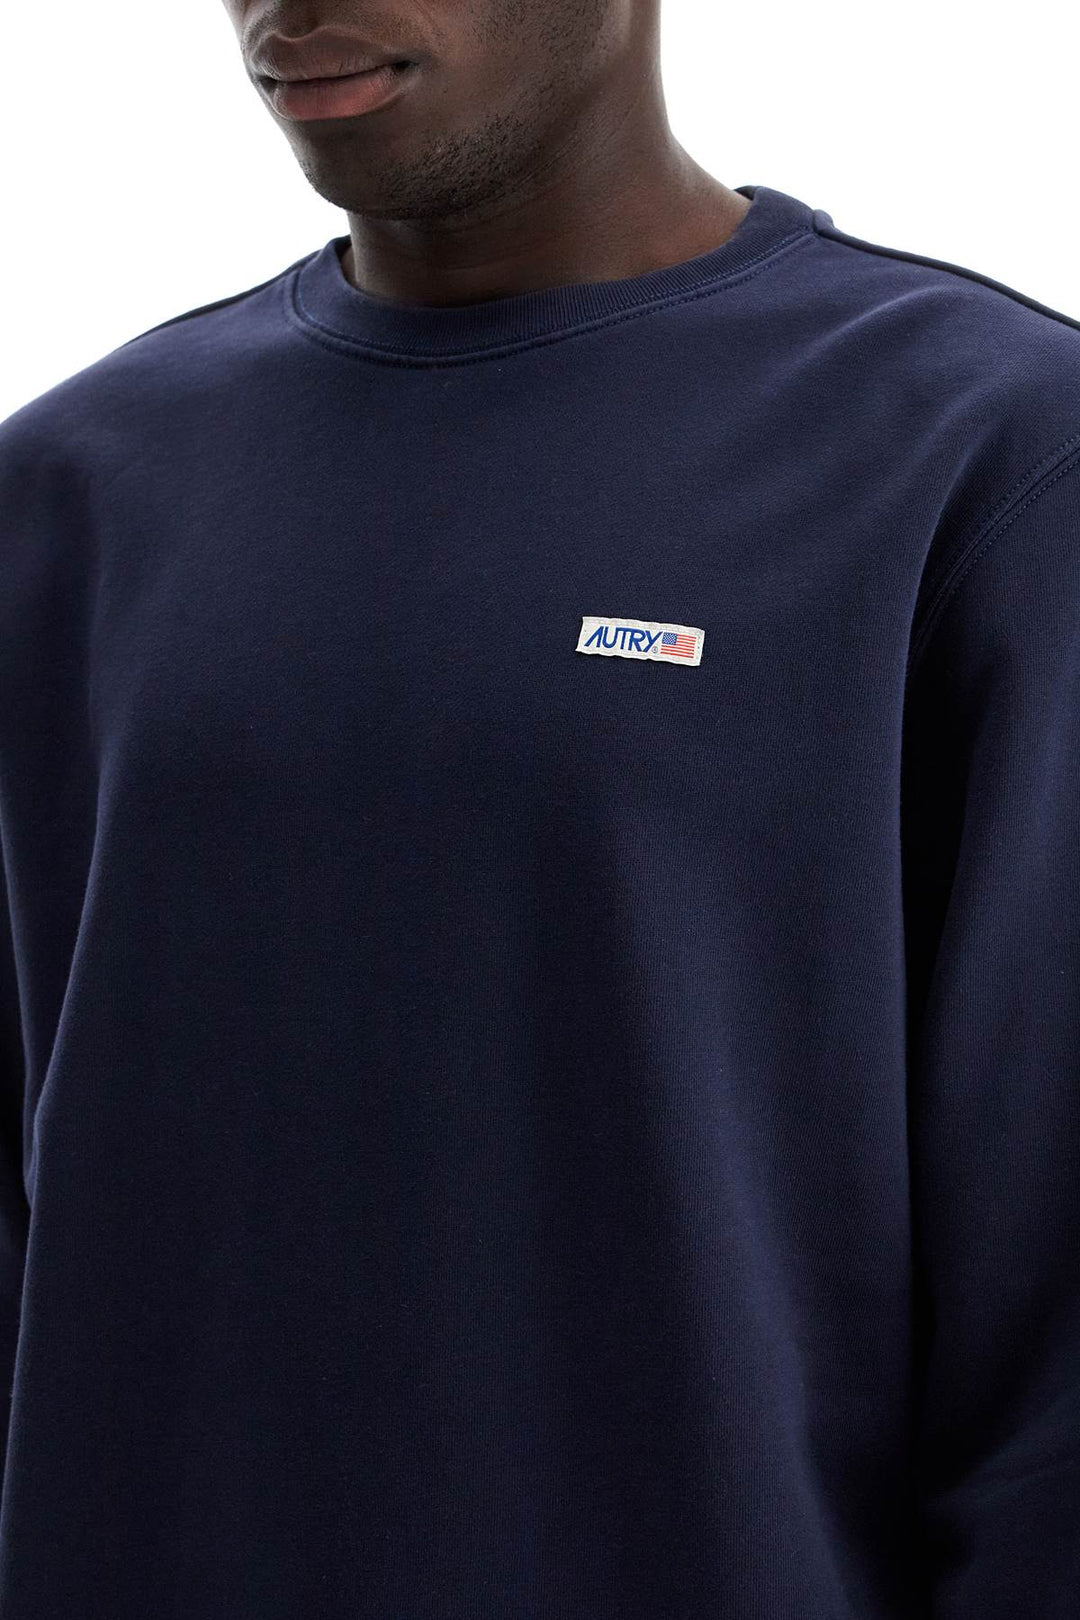 Autry Relaxed Fit Crewneck Sweat   Blue